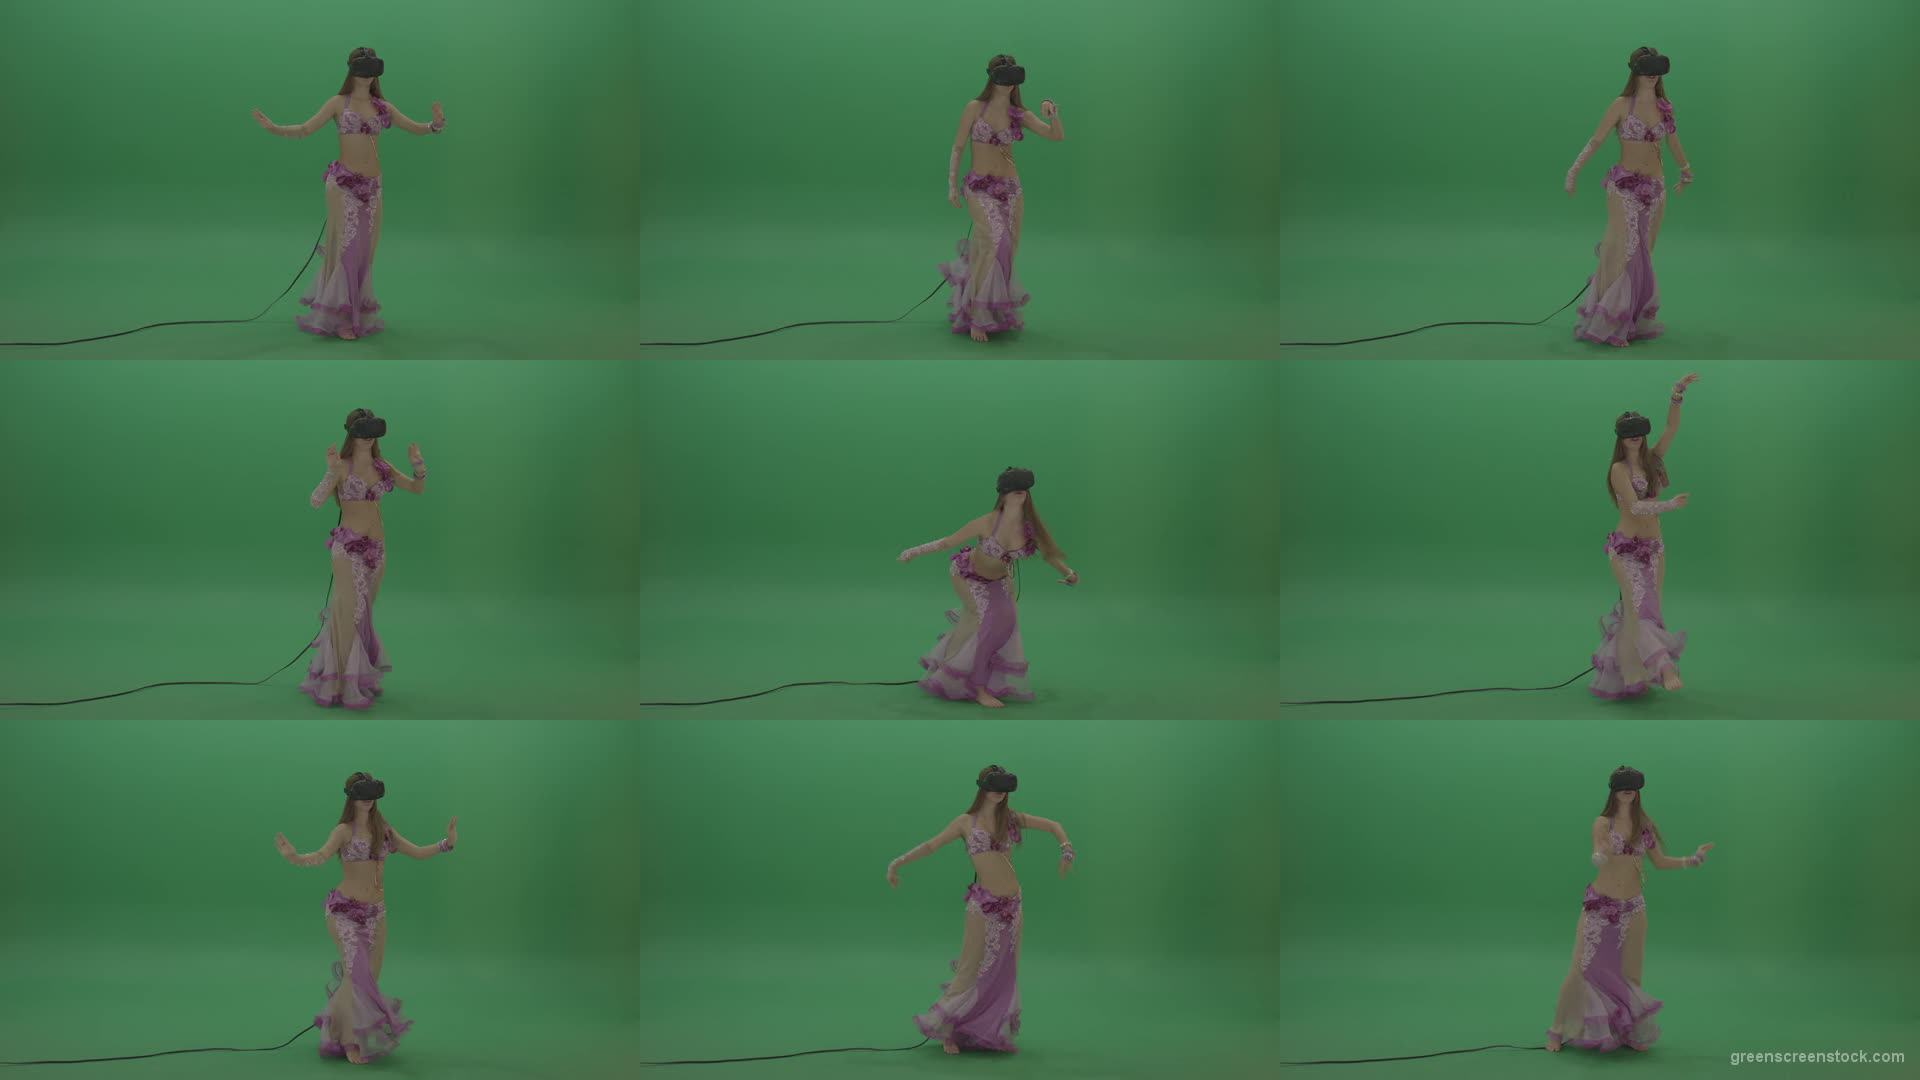 Beautiful-belly-dancer-in-purple-wear-and-VR-headset-dances-over-green-screen-background-1920 Green Screen Stock